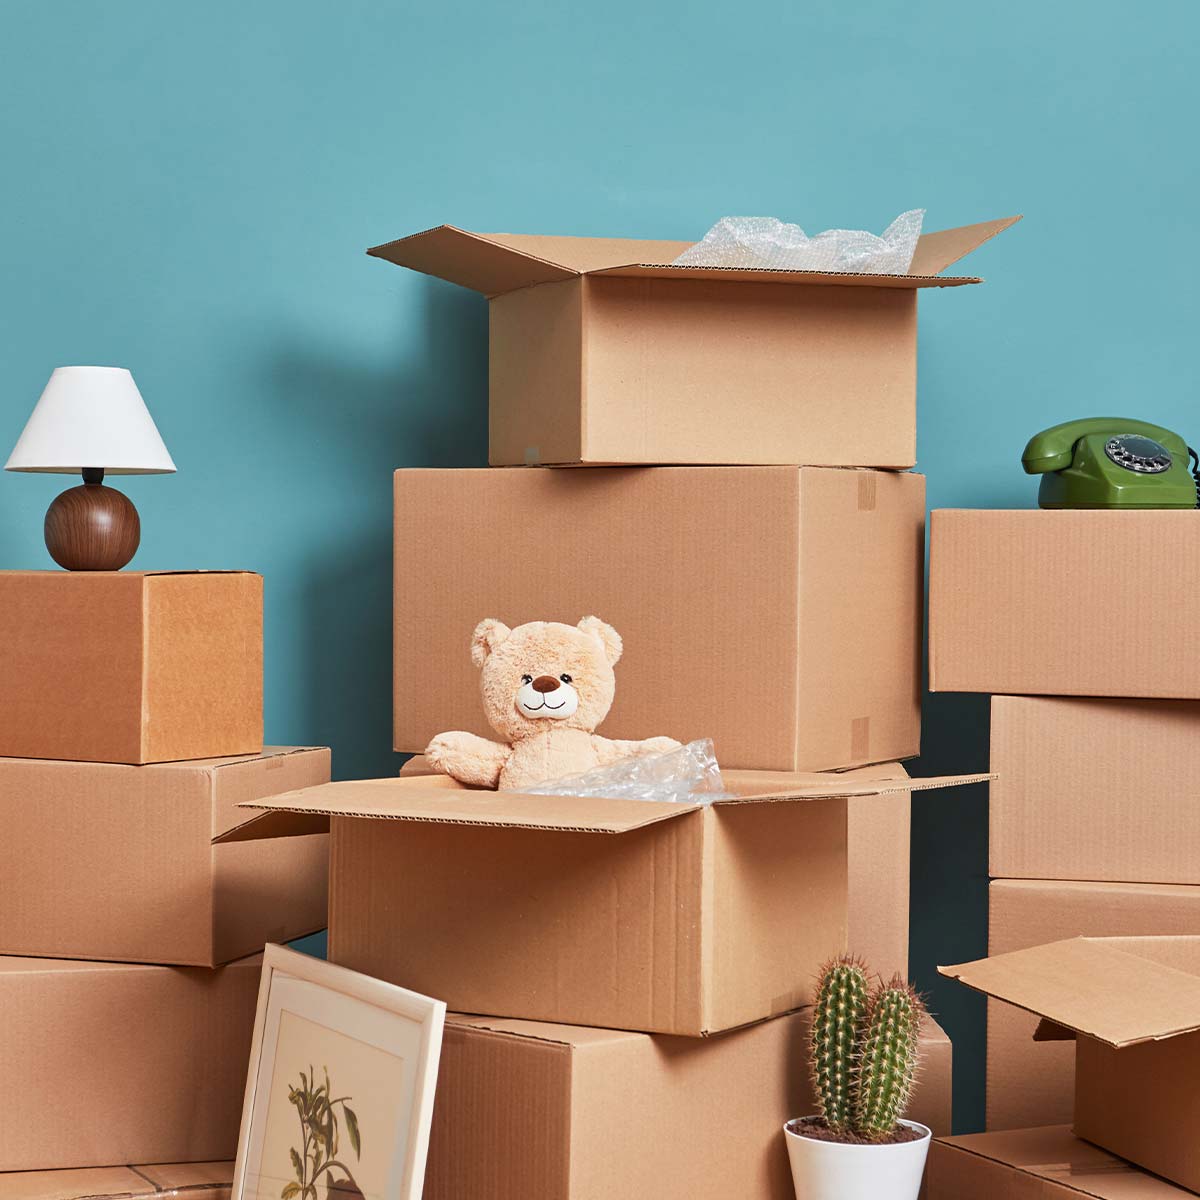 image of boxes packed and arranged for moving